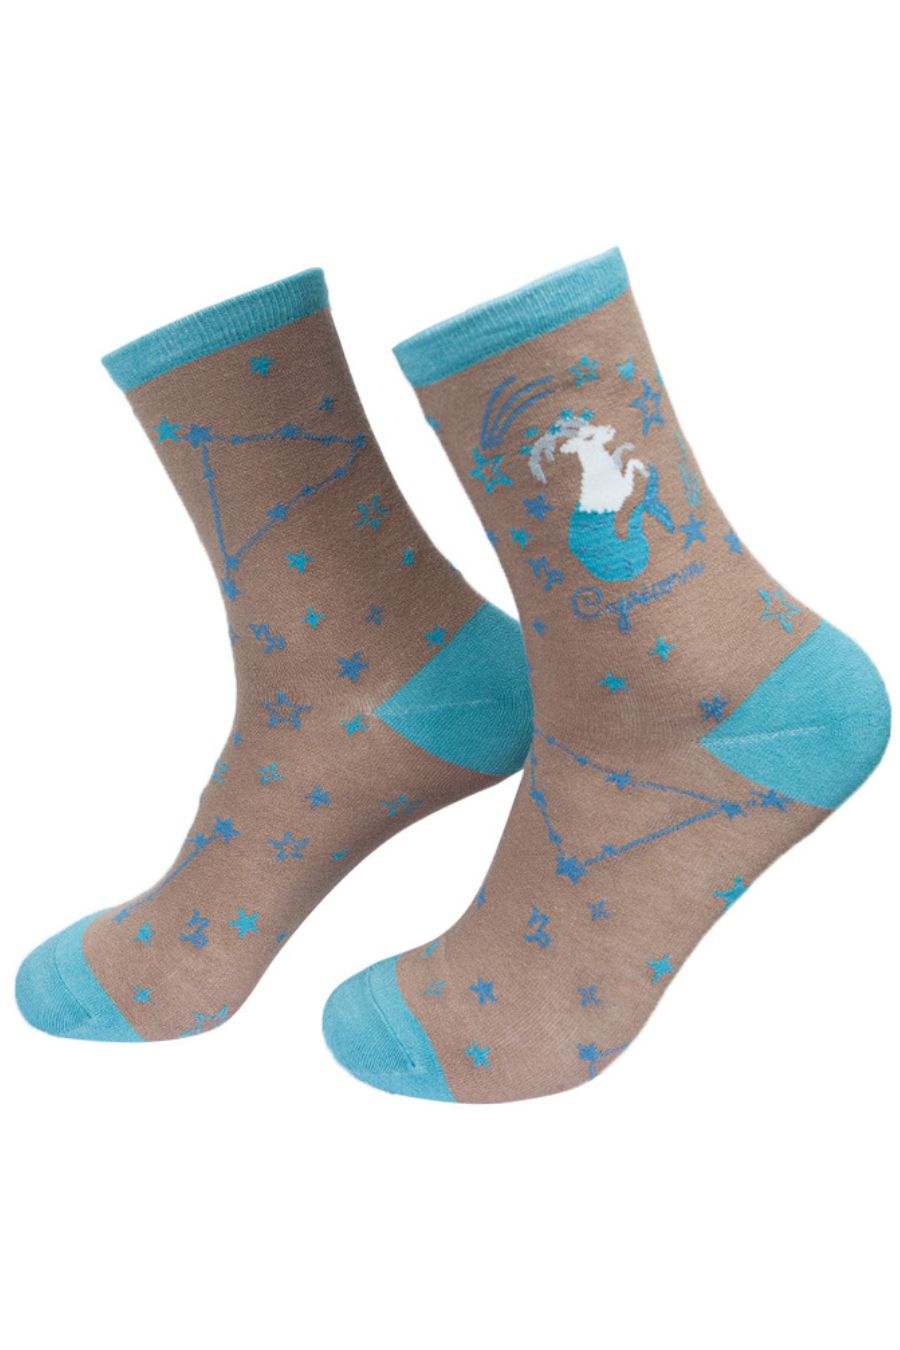 mustard and blue ankle socks with the constellation and symbol of capricorn